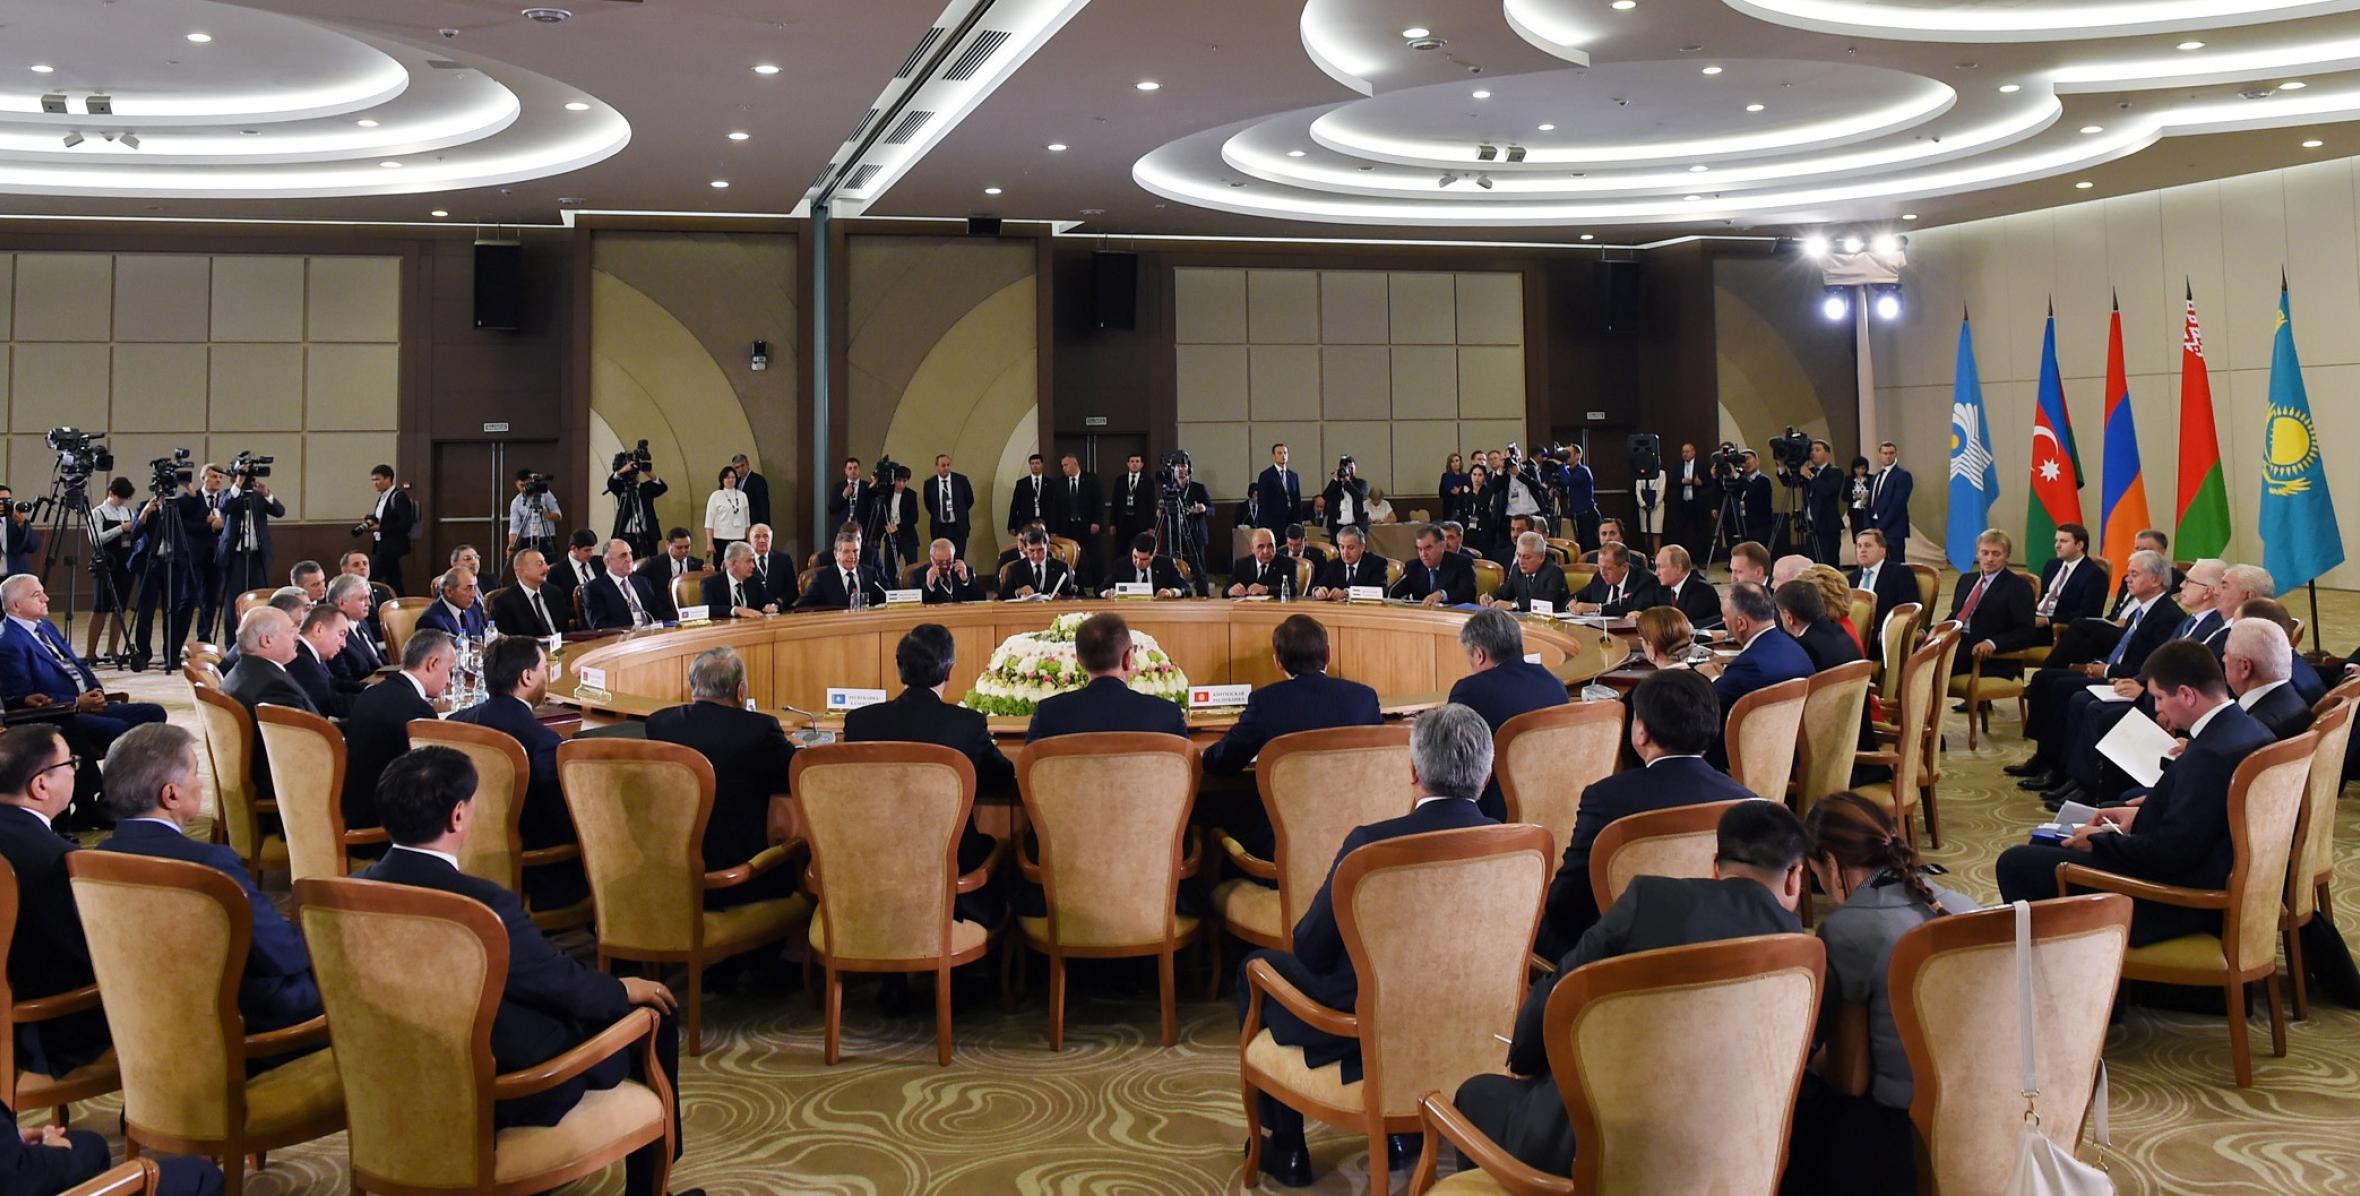 Ilham Aliyev attended expanded session of CIS Heads of State Council in Sochi